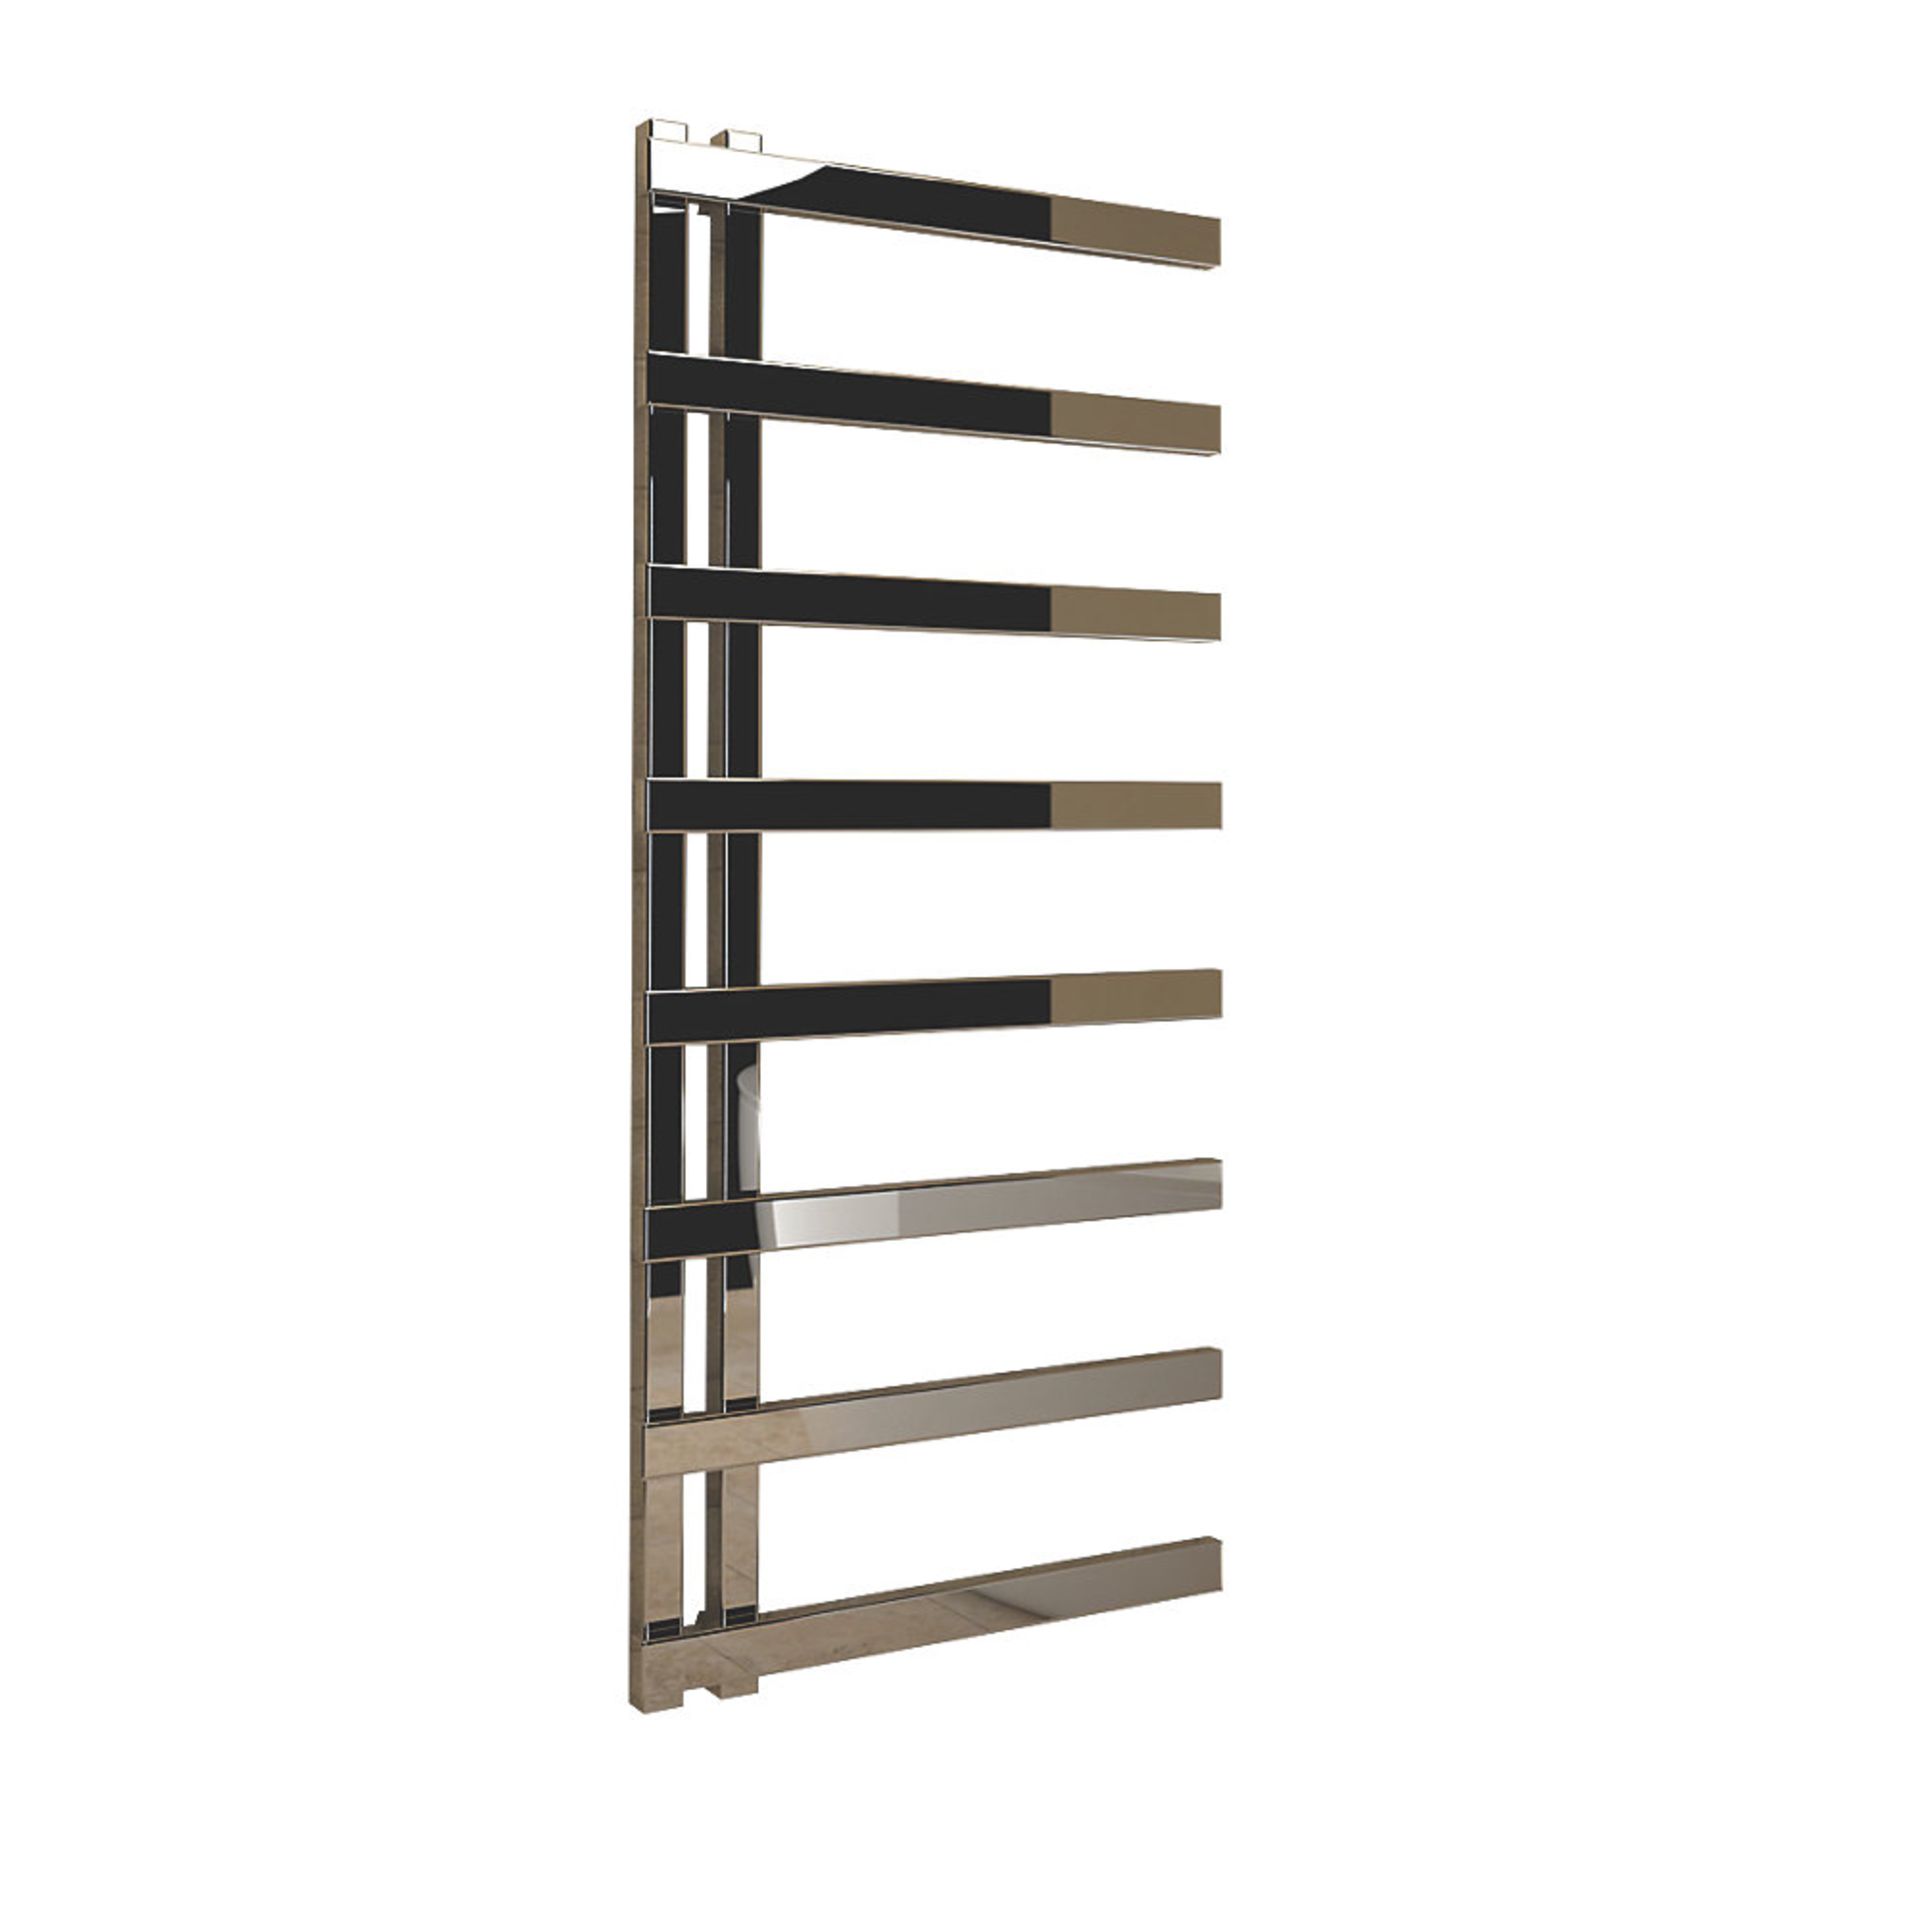 (RR129) 1150x500mm Astrillo Towel Rail Chrome. RRP £135.99. Suitable for Central Heating, Elec... ( - Image 2 of 2